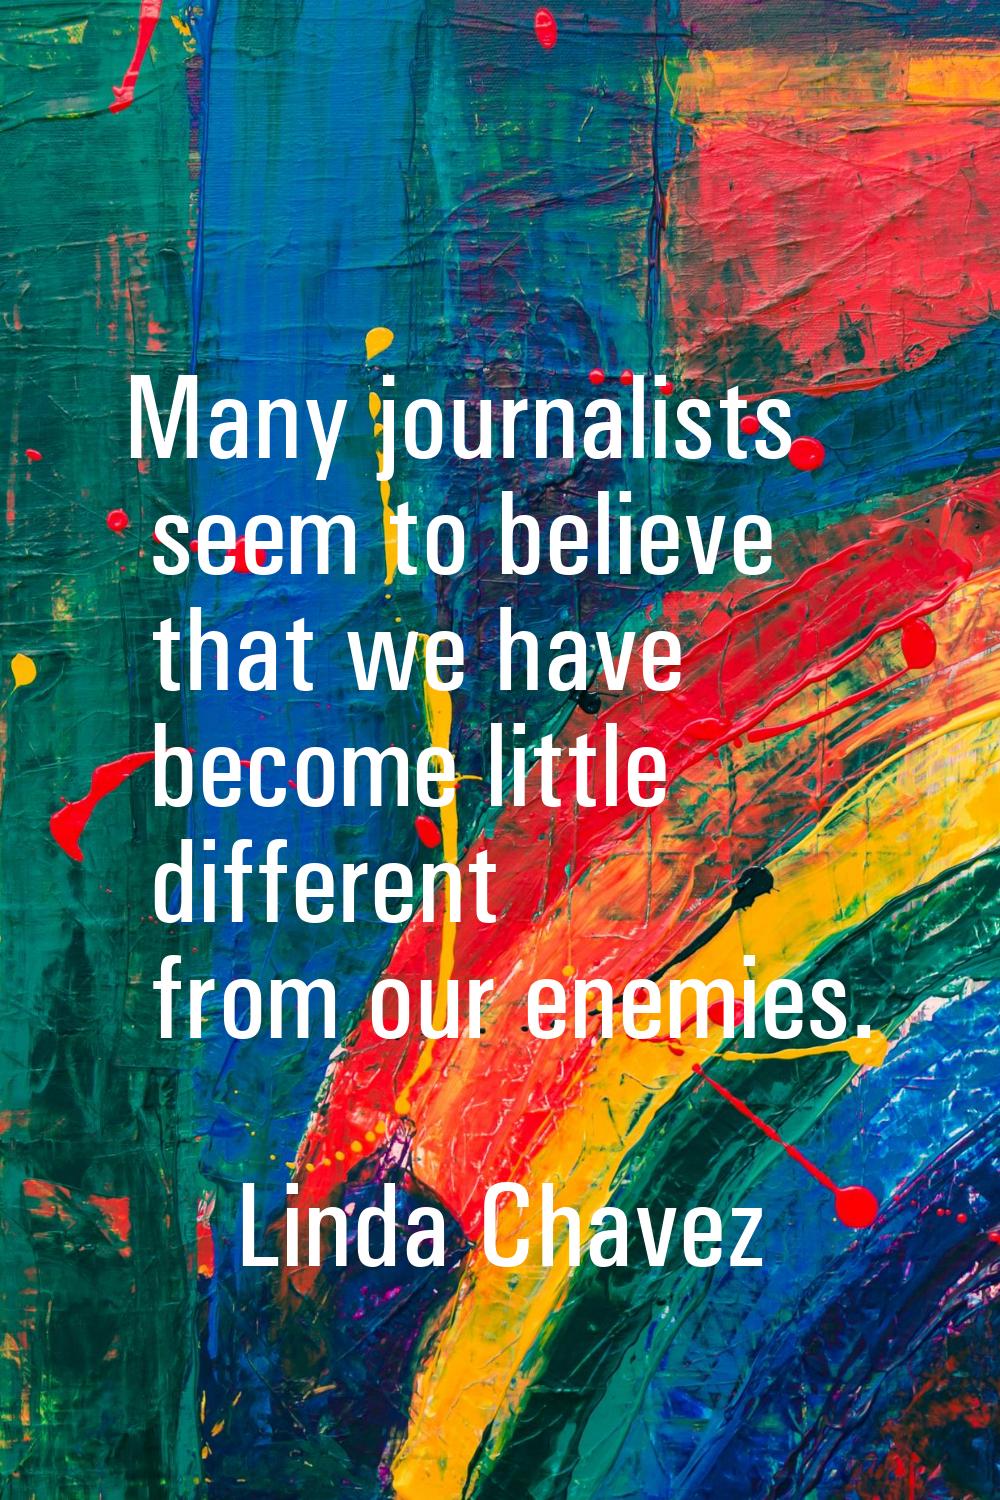 Many journalists seem to believe that we have become little different from our enemies.